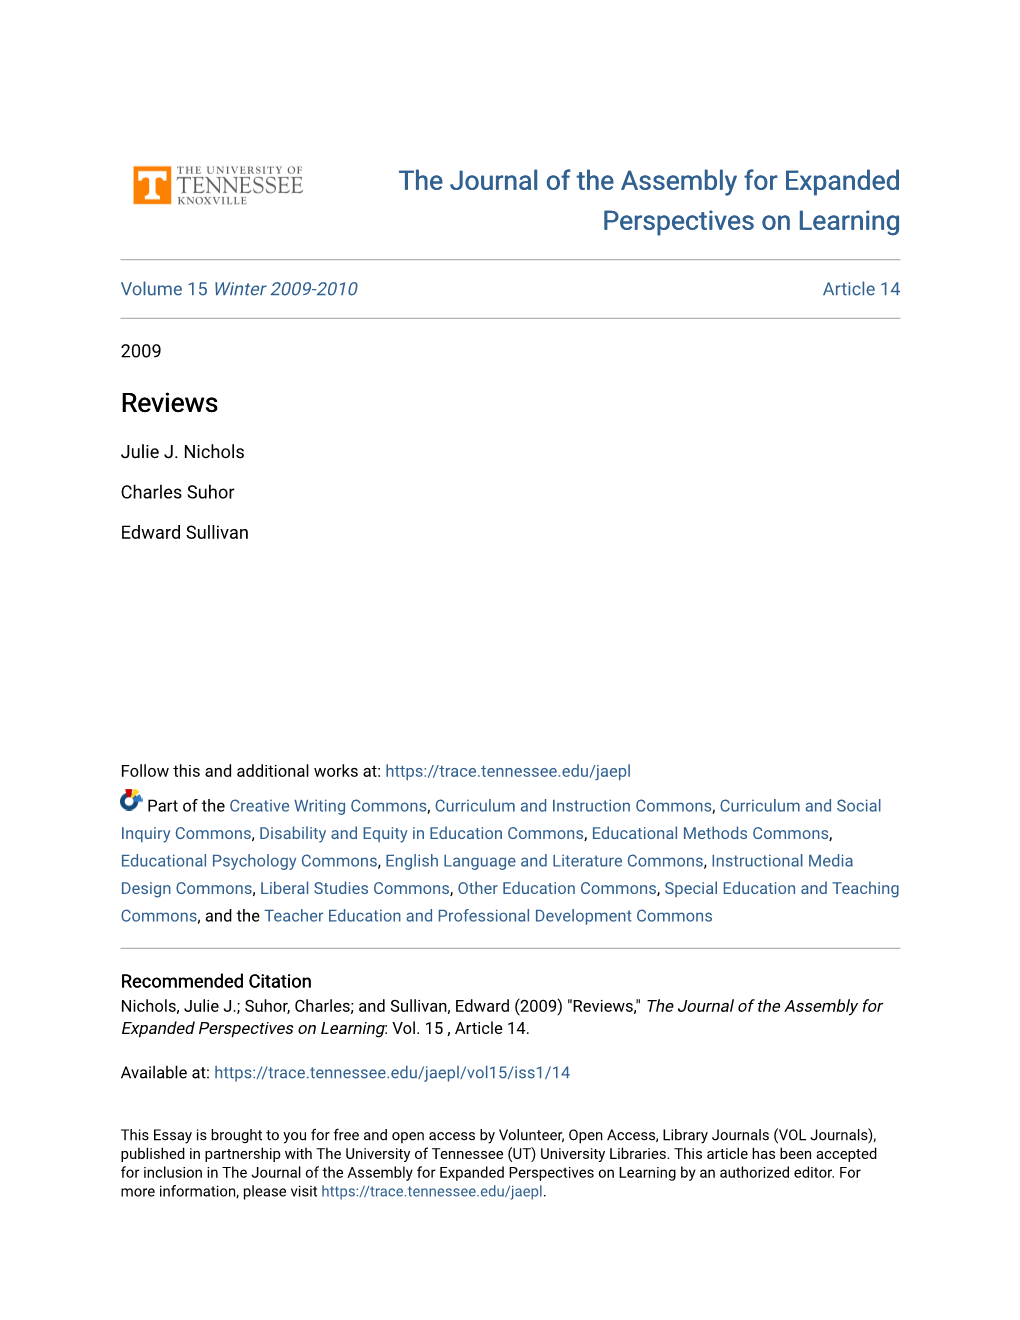 The Journal of the Assembly for Expanded Perspectives on Learning